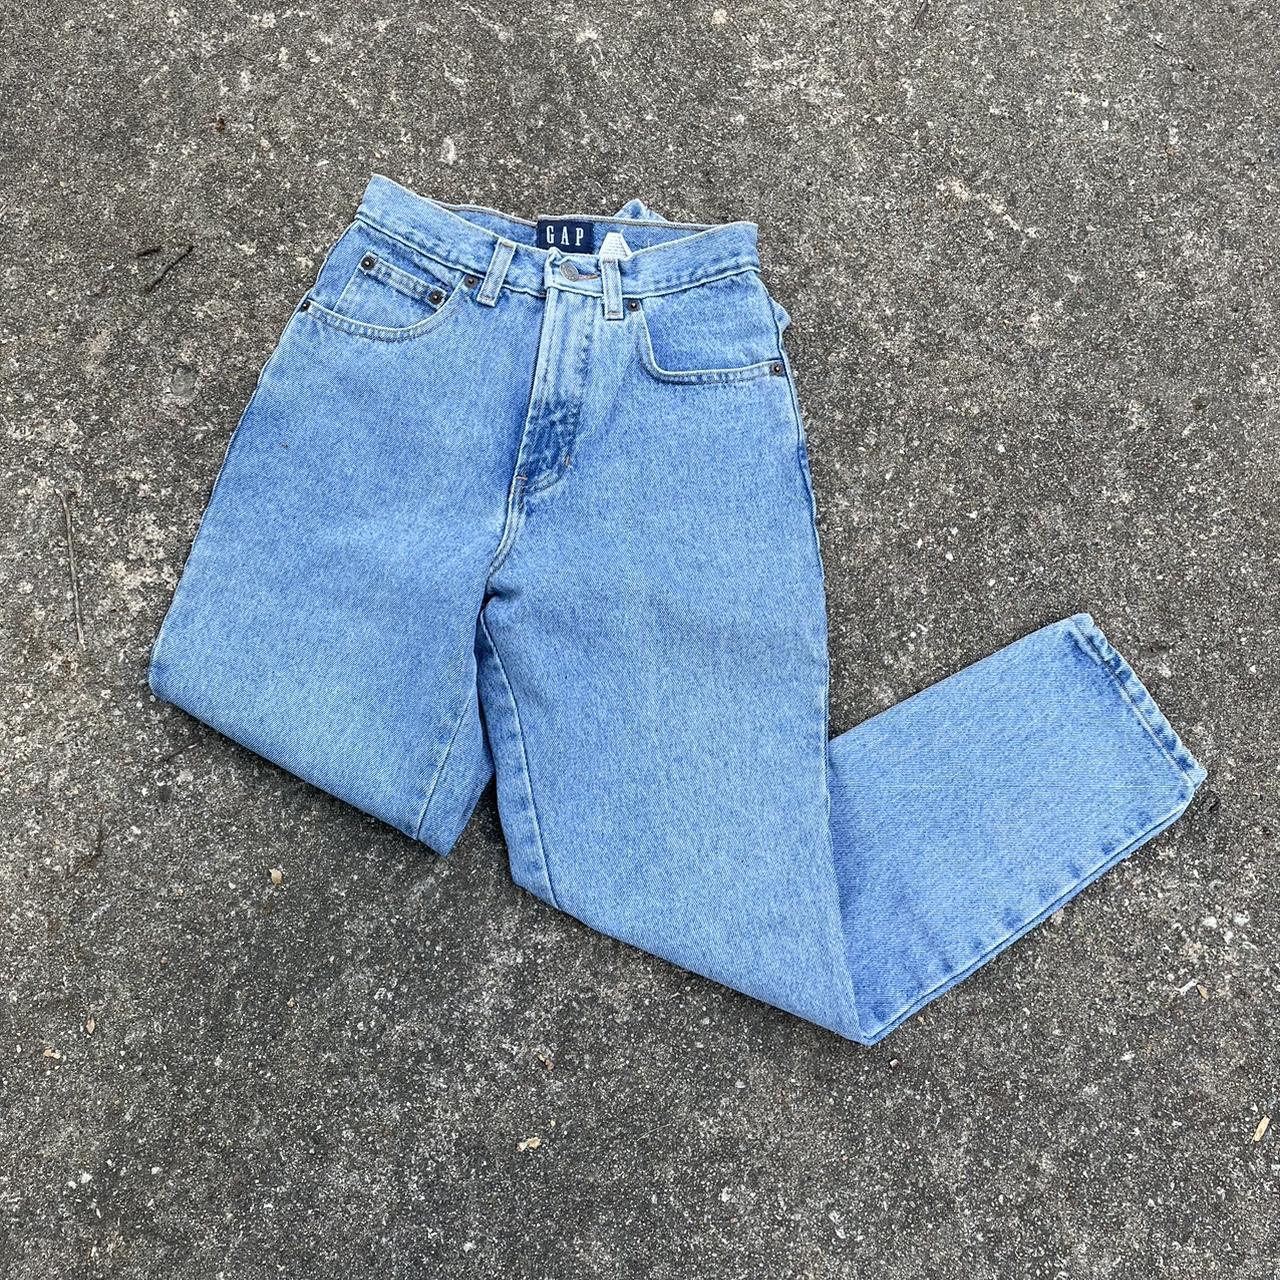 What year do you think these GAP blue jeans are from? Vintage